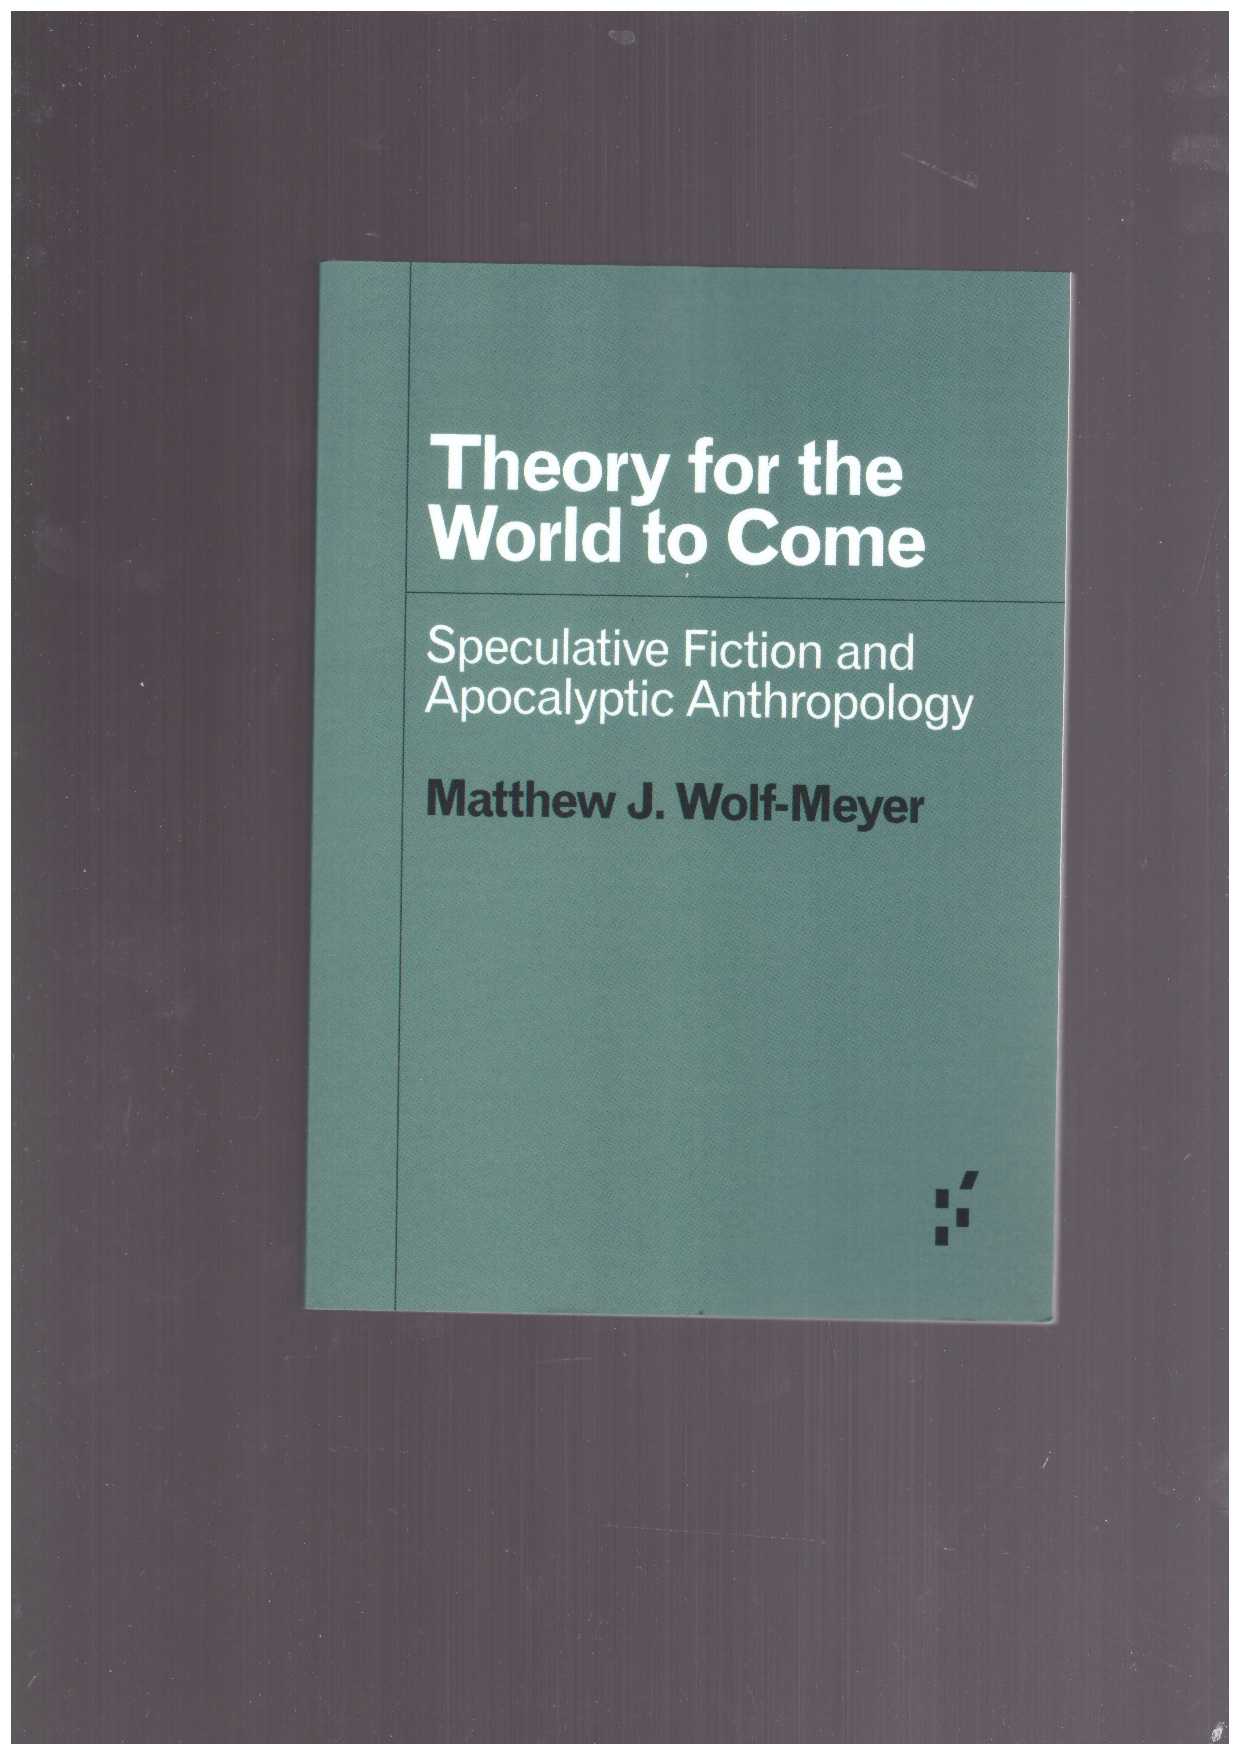 WOLF-MEYER, Matthew J.  - Theory for the World to Come. Speculative Fiction and Apocalyptic Anthropology